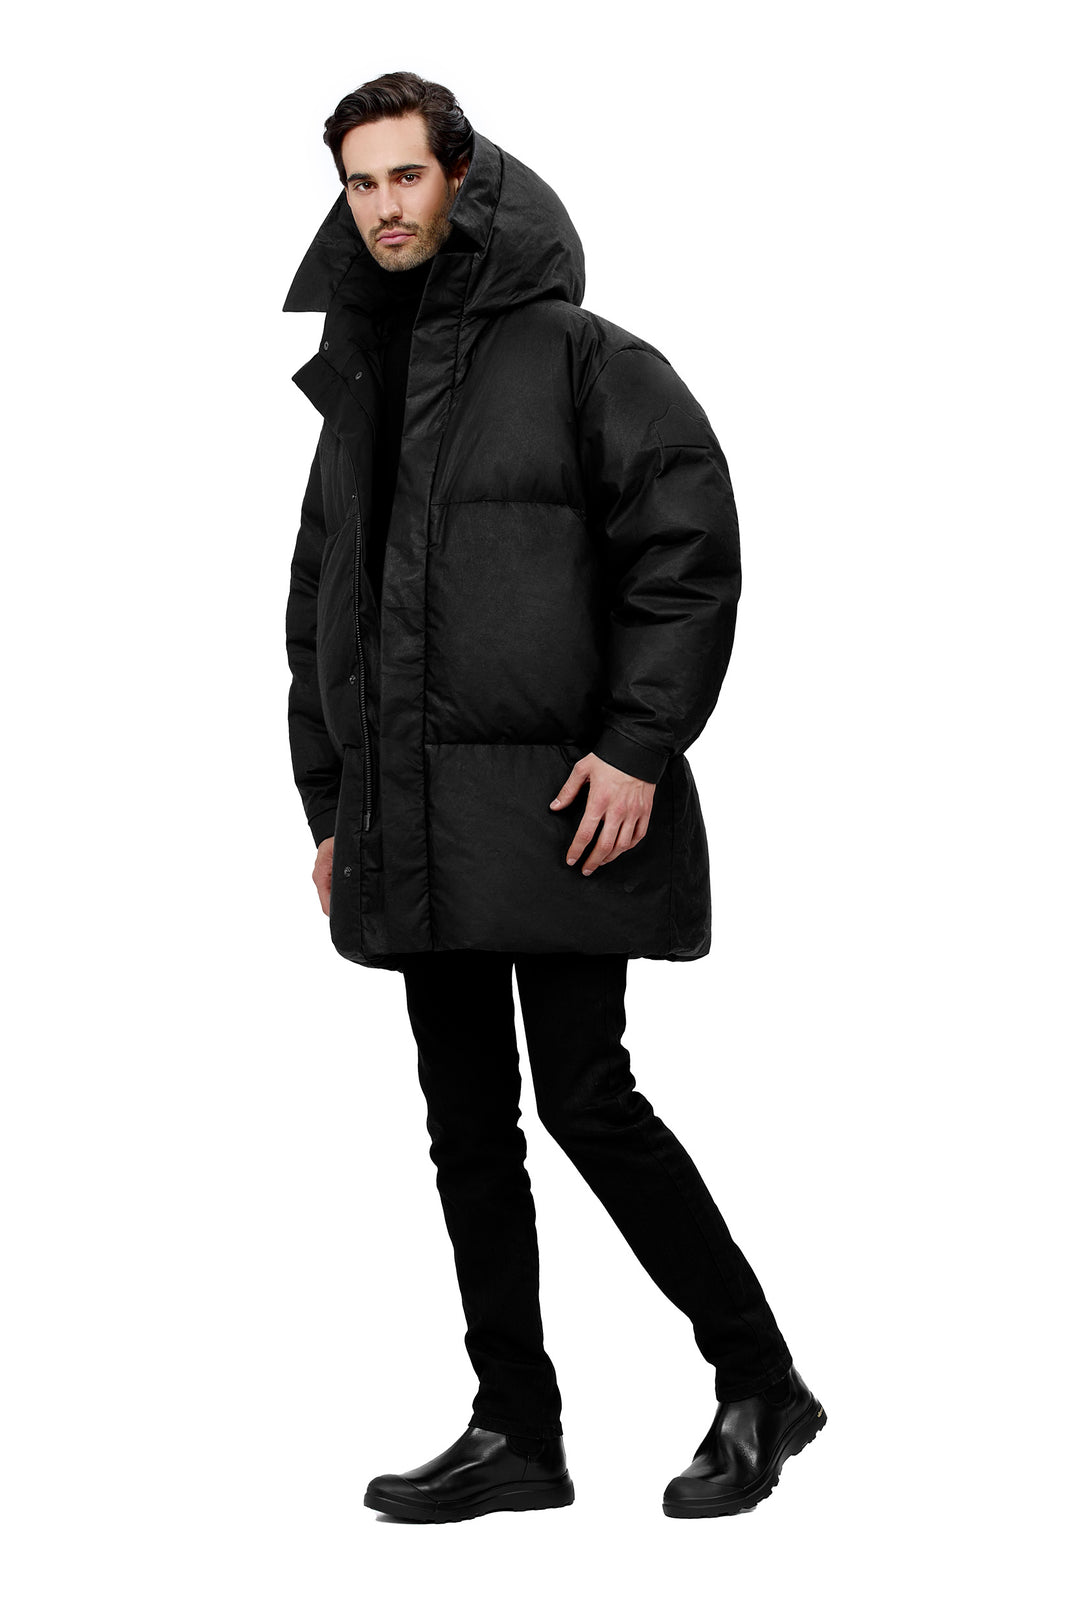 The Parka – Olmsted Outerwear